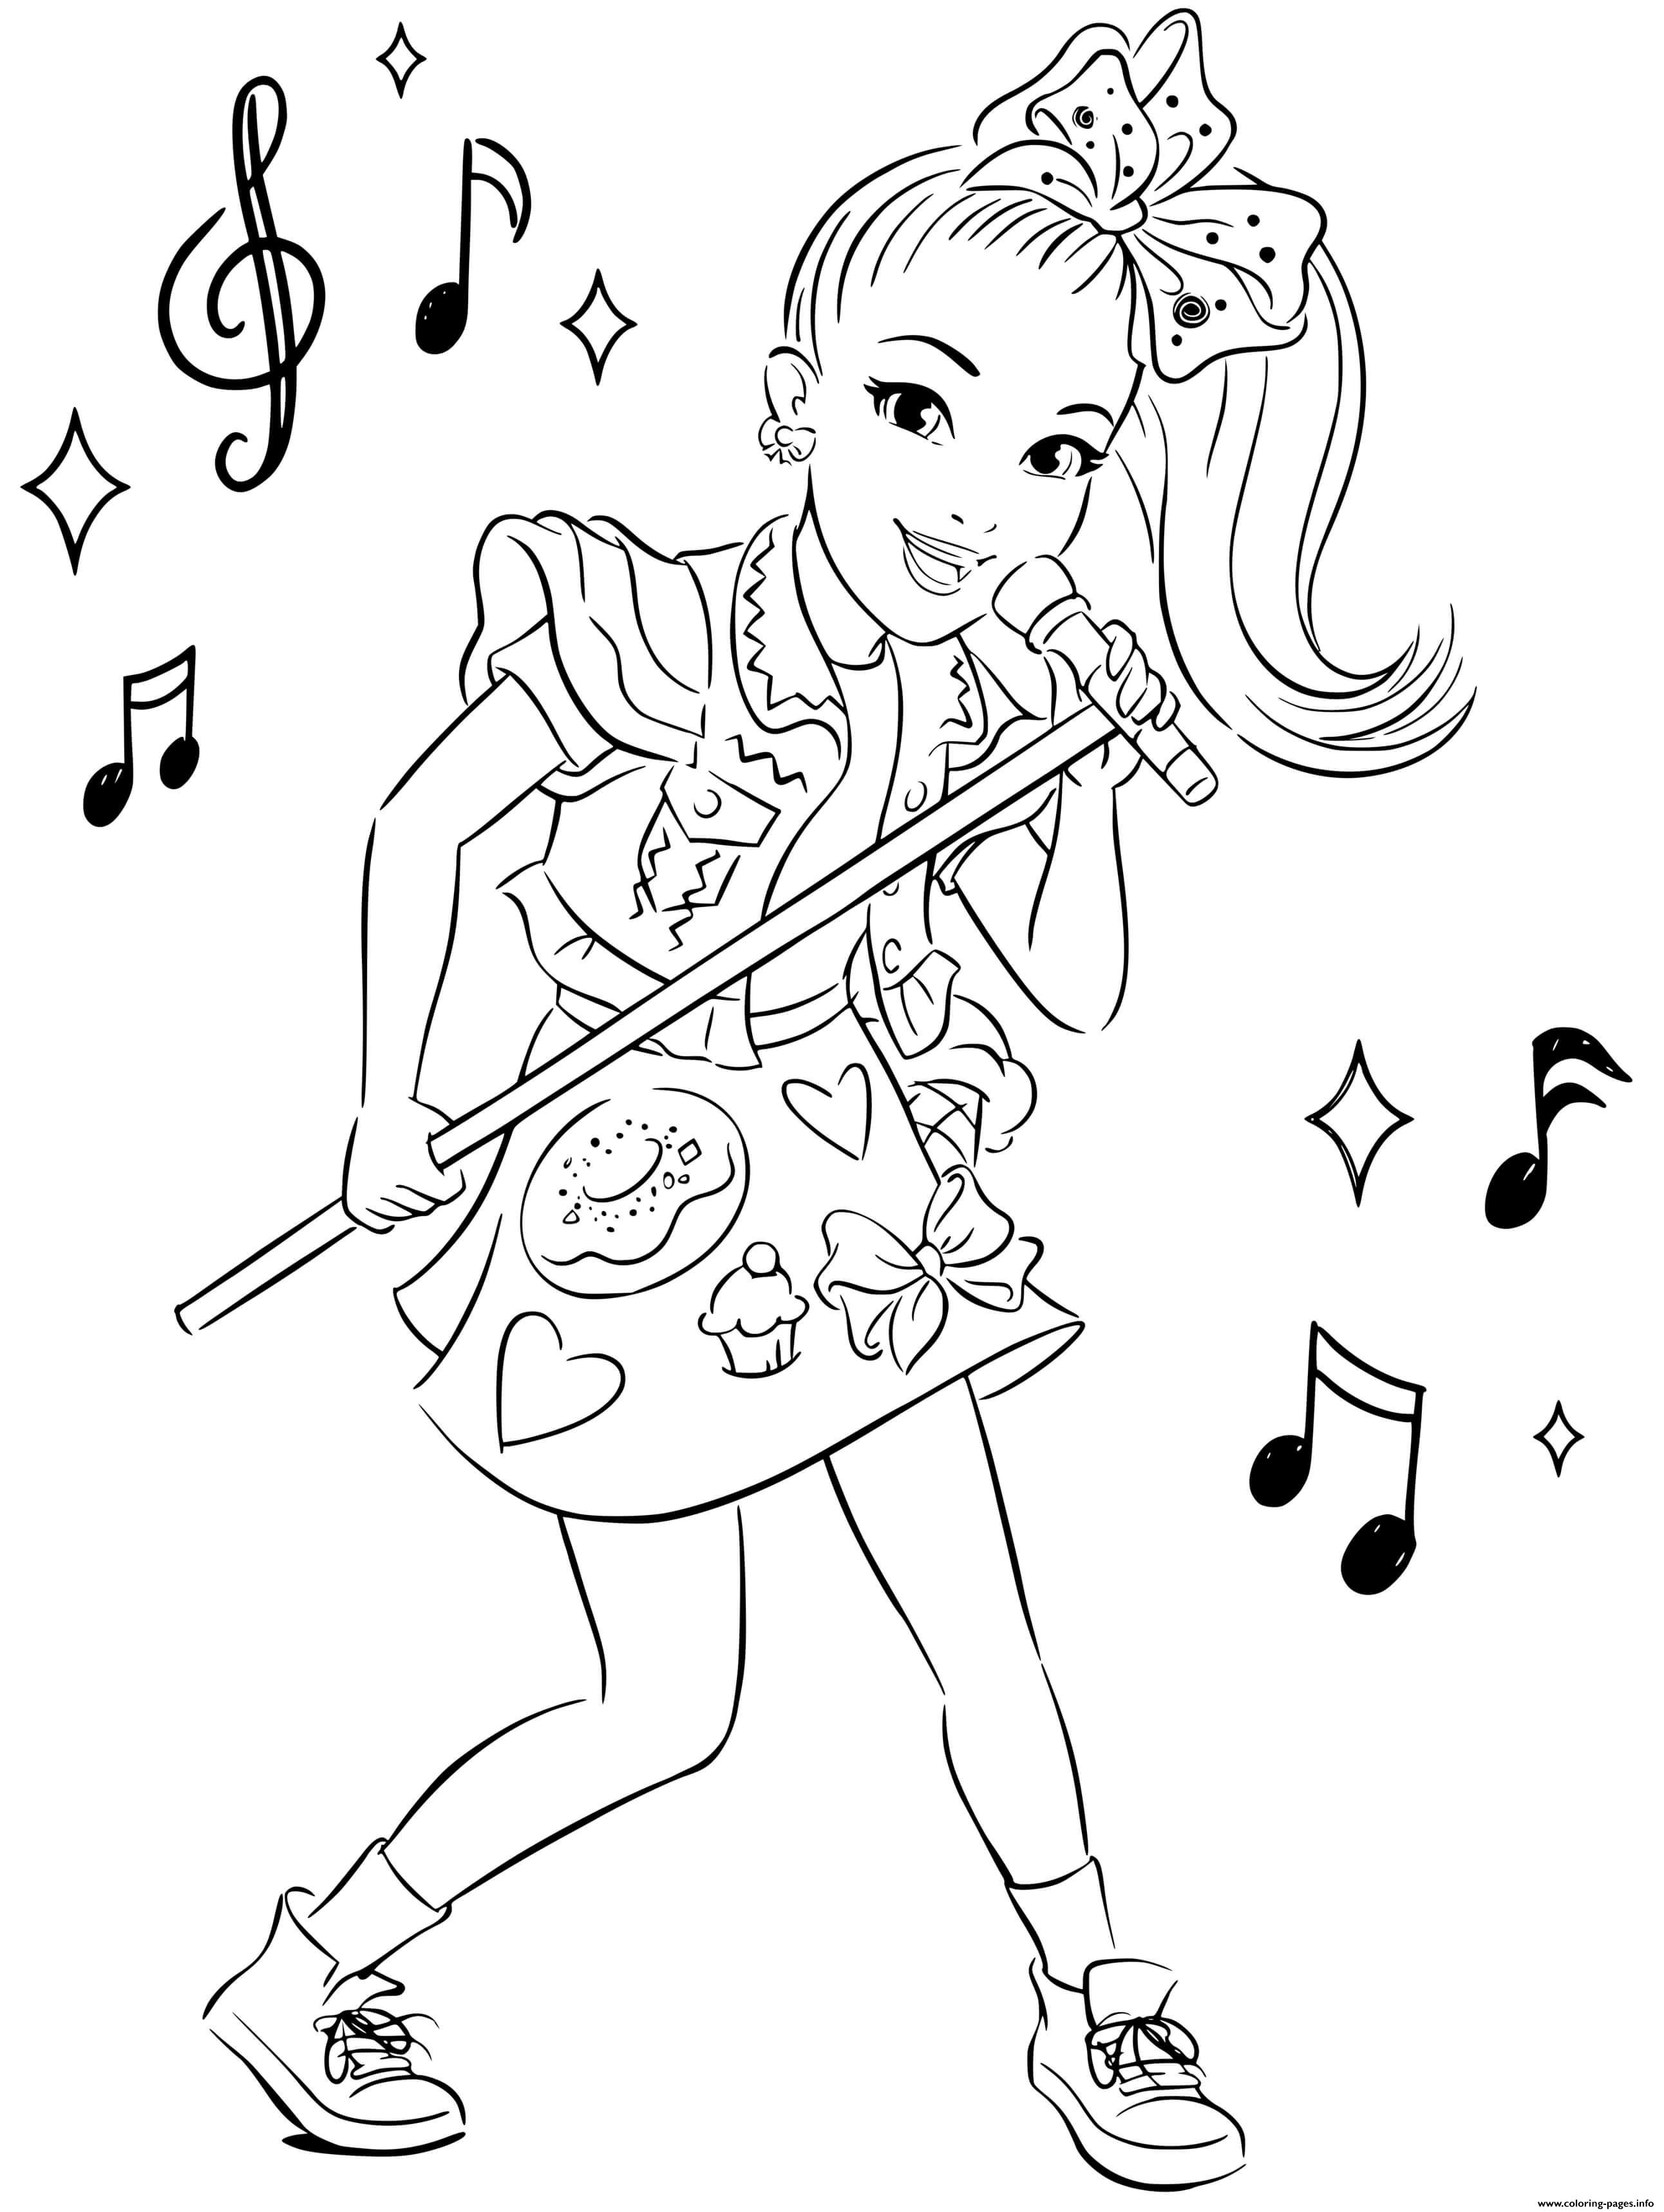 JoJo Siwa Star Sparly Outfits coloring